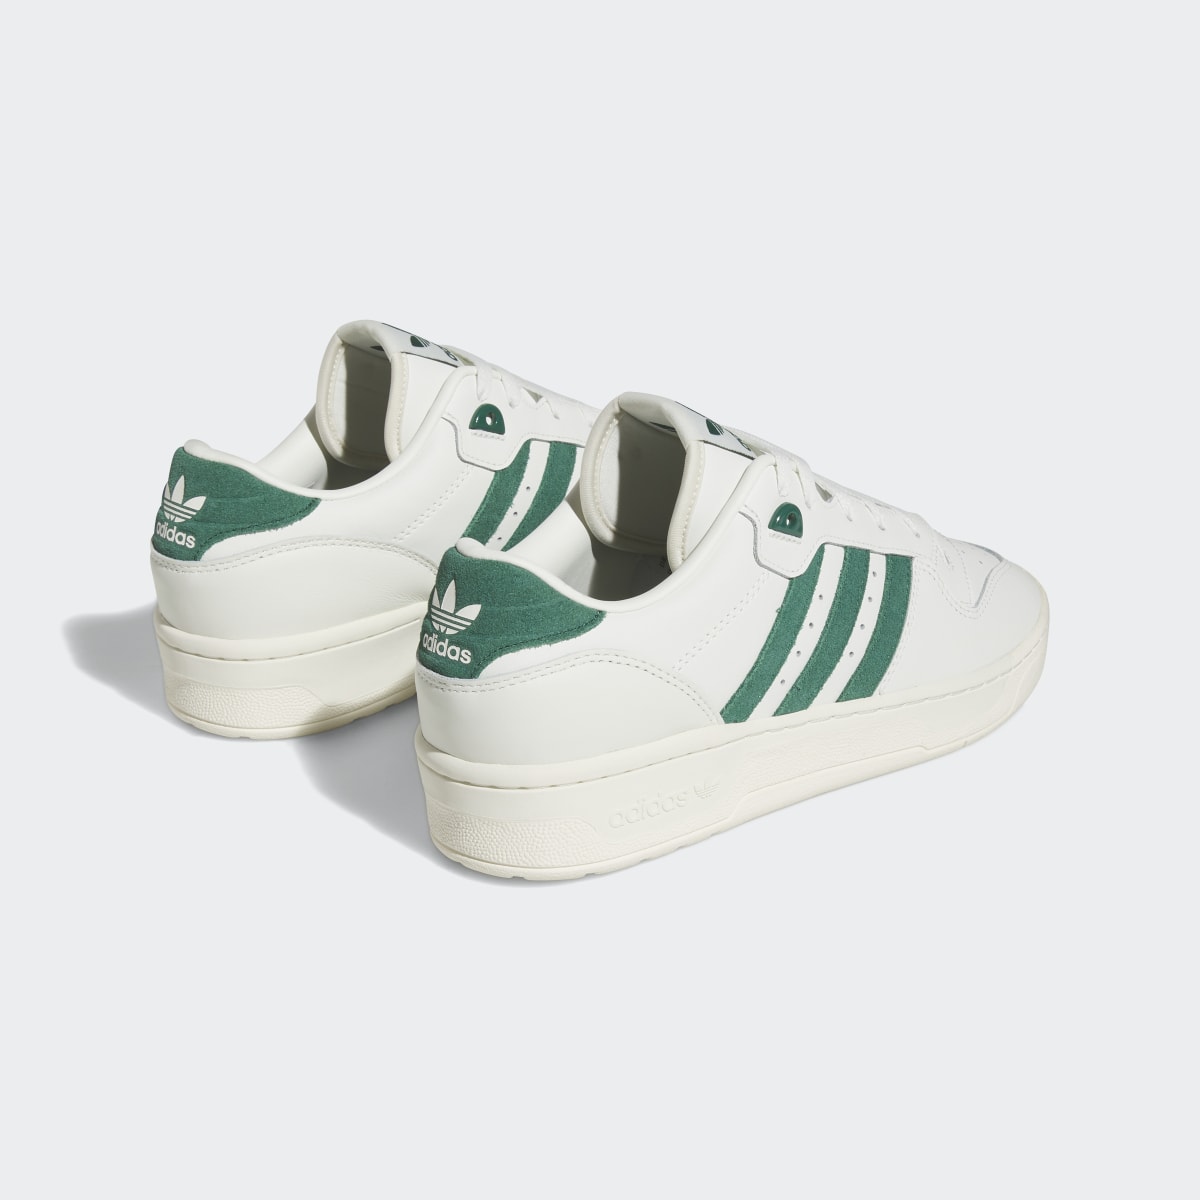 Adidas RIVALRY LOW. 6